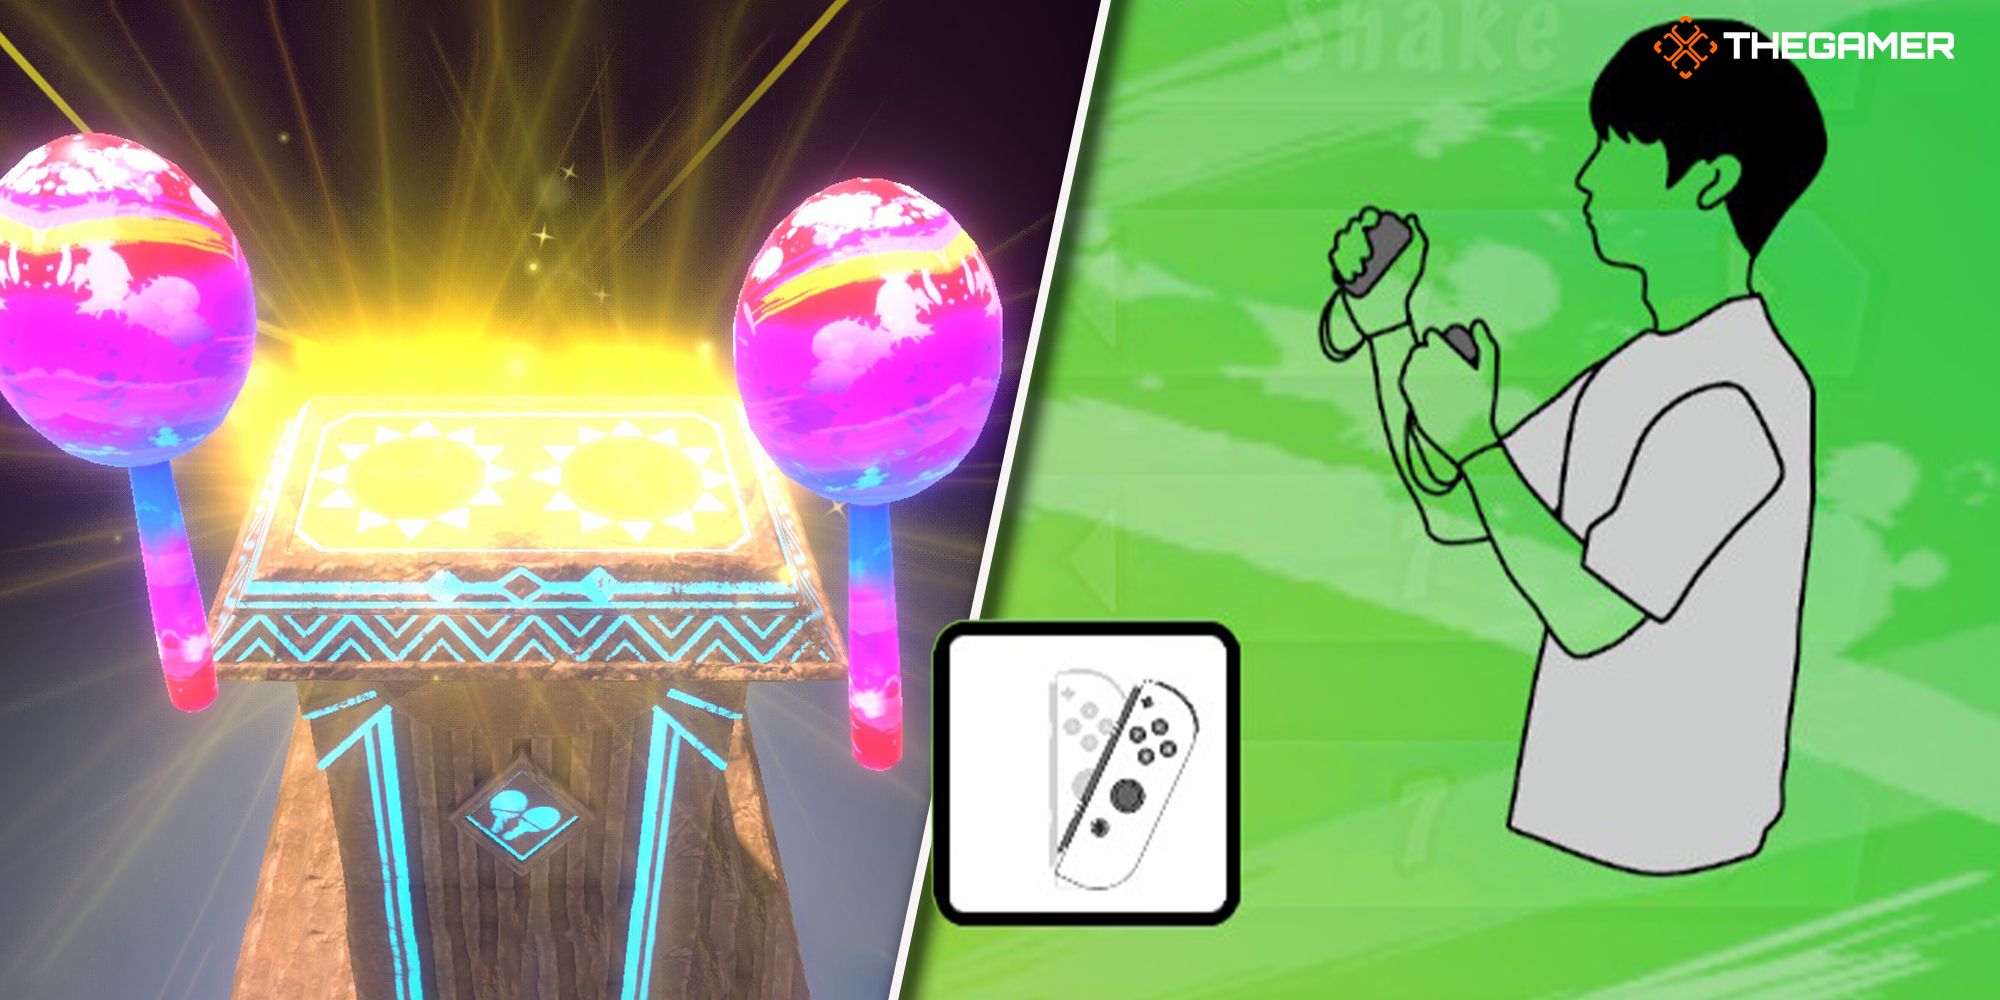 [Left Panel] A magical pair of maracas get sheathed from a mythical podium. [Right Panel] A young player shakes their Joy-Con in a tutorial. Images from Samba de Amigo: Party Central.